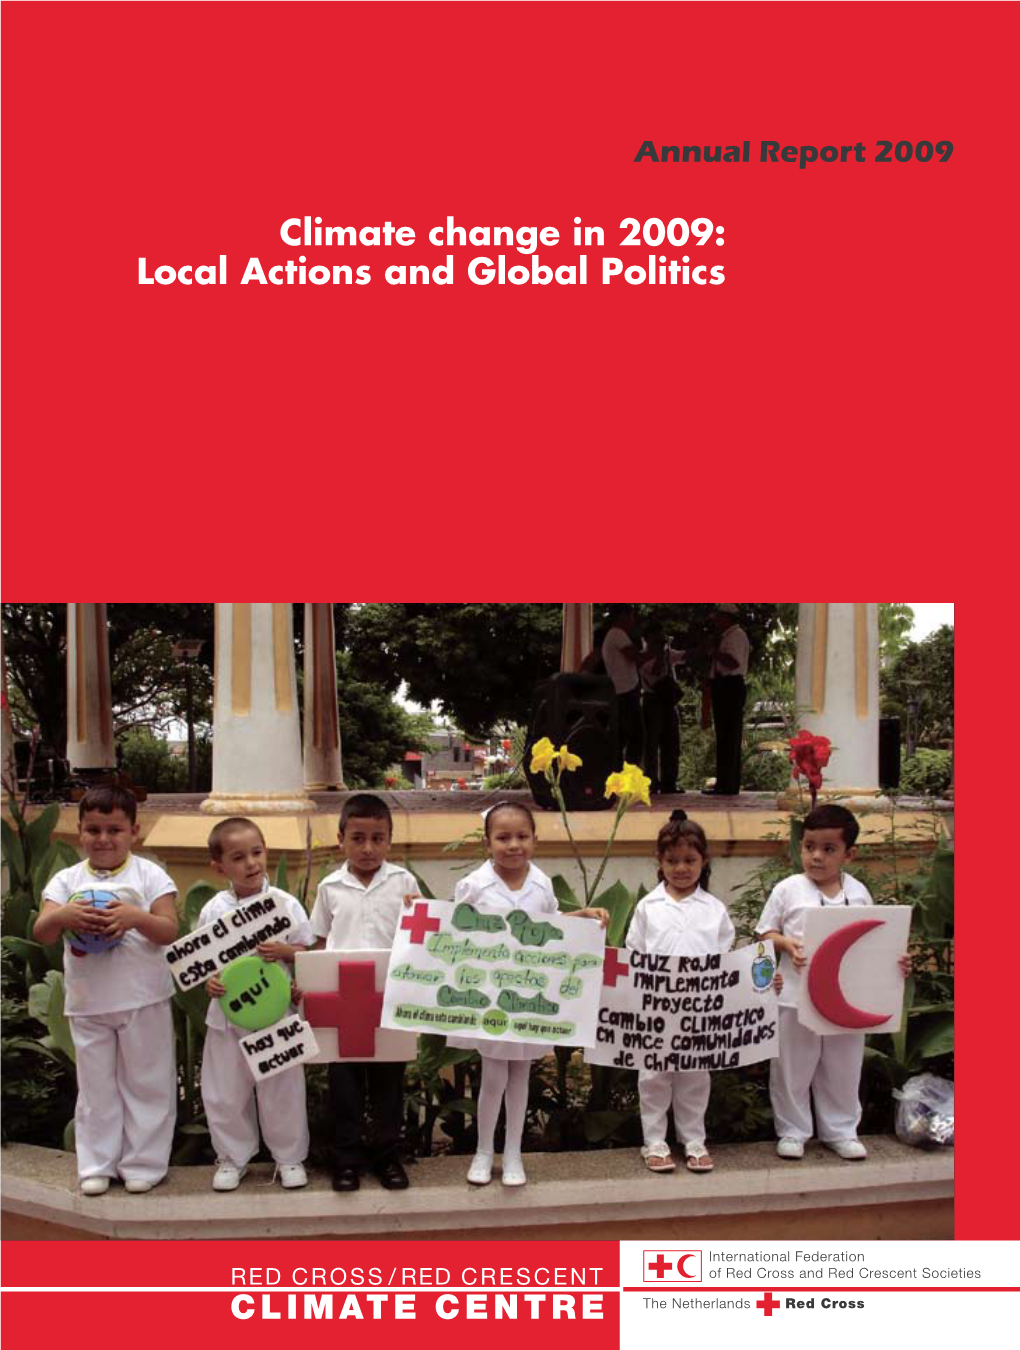 Annual Report 2009, Climate Change in 2009: Local Actions and Global